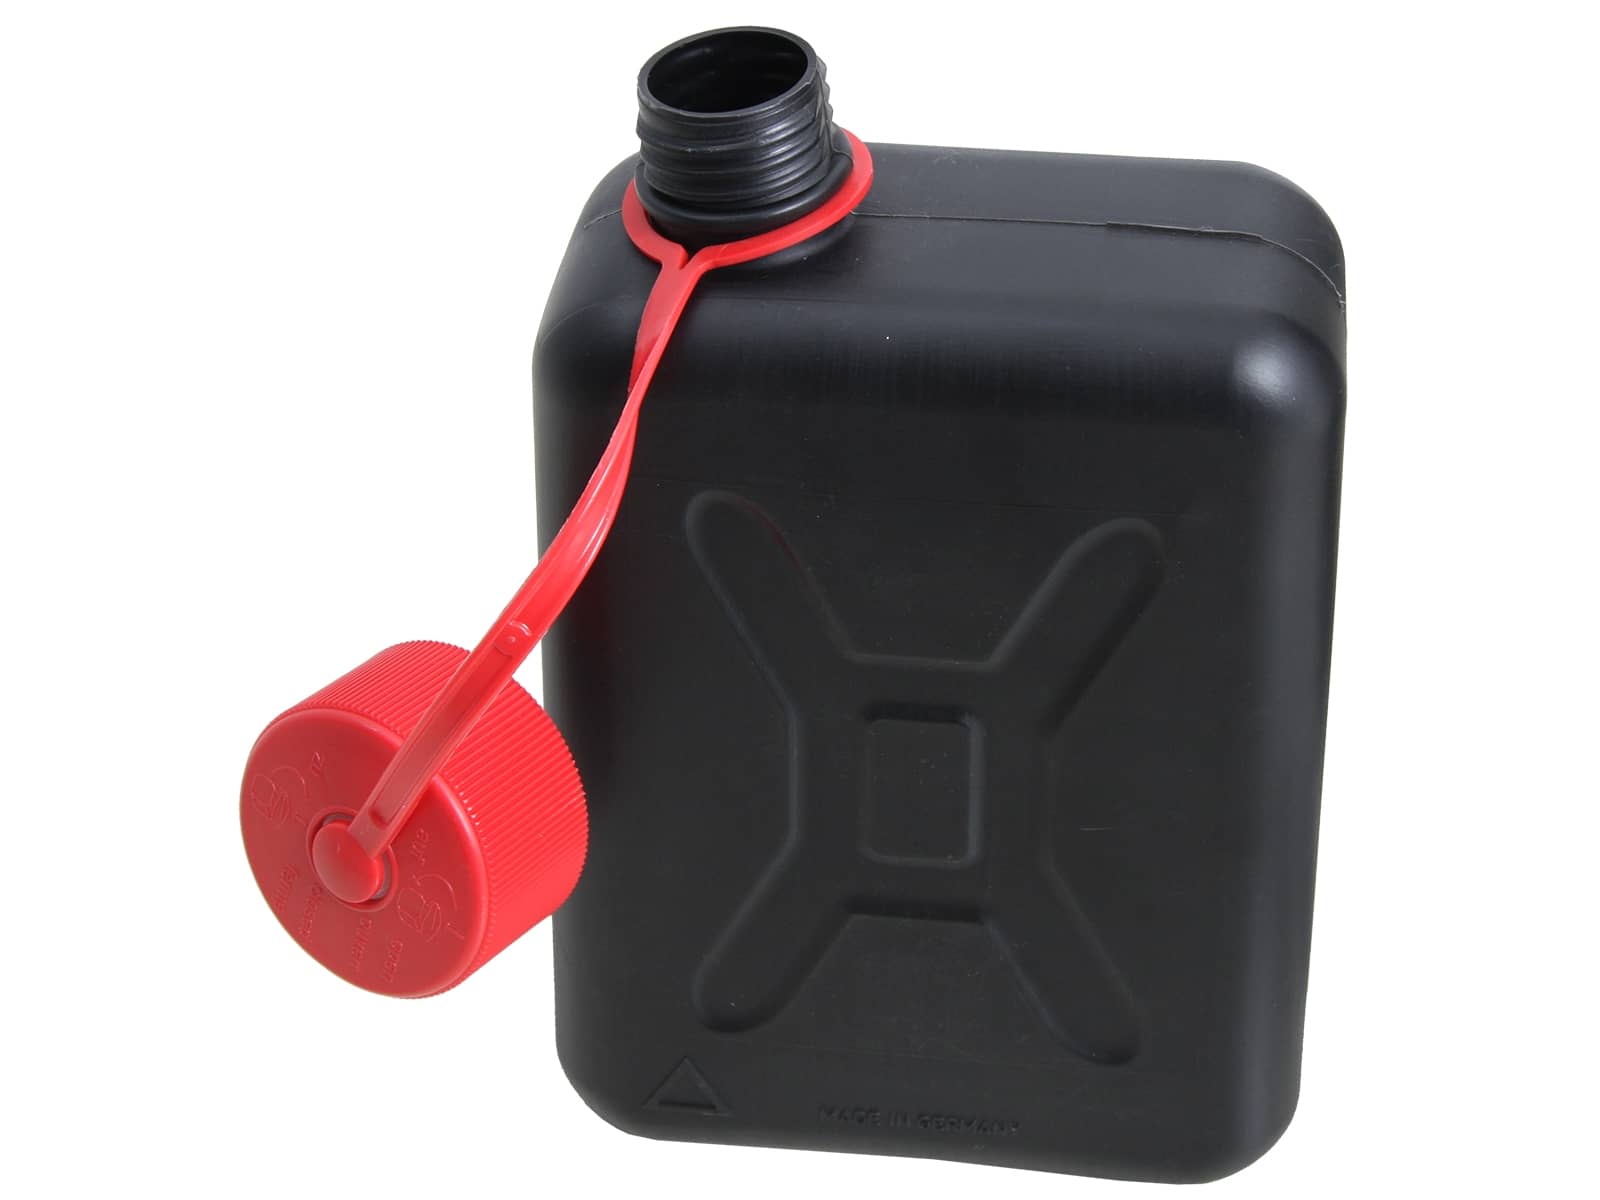 2 ltr. fuel canister incl. Universal bracket and mounting kit